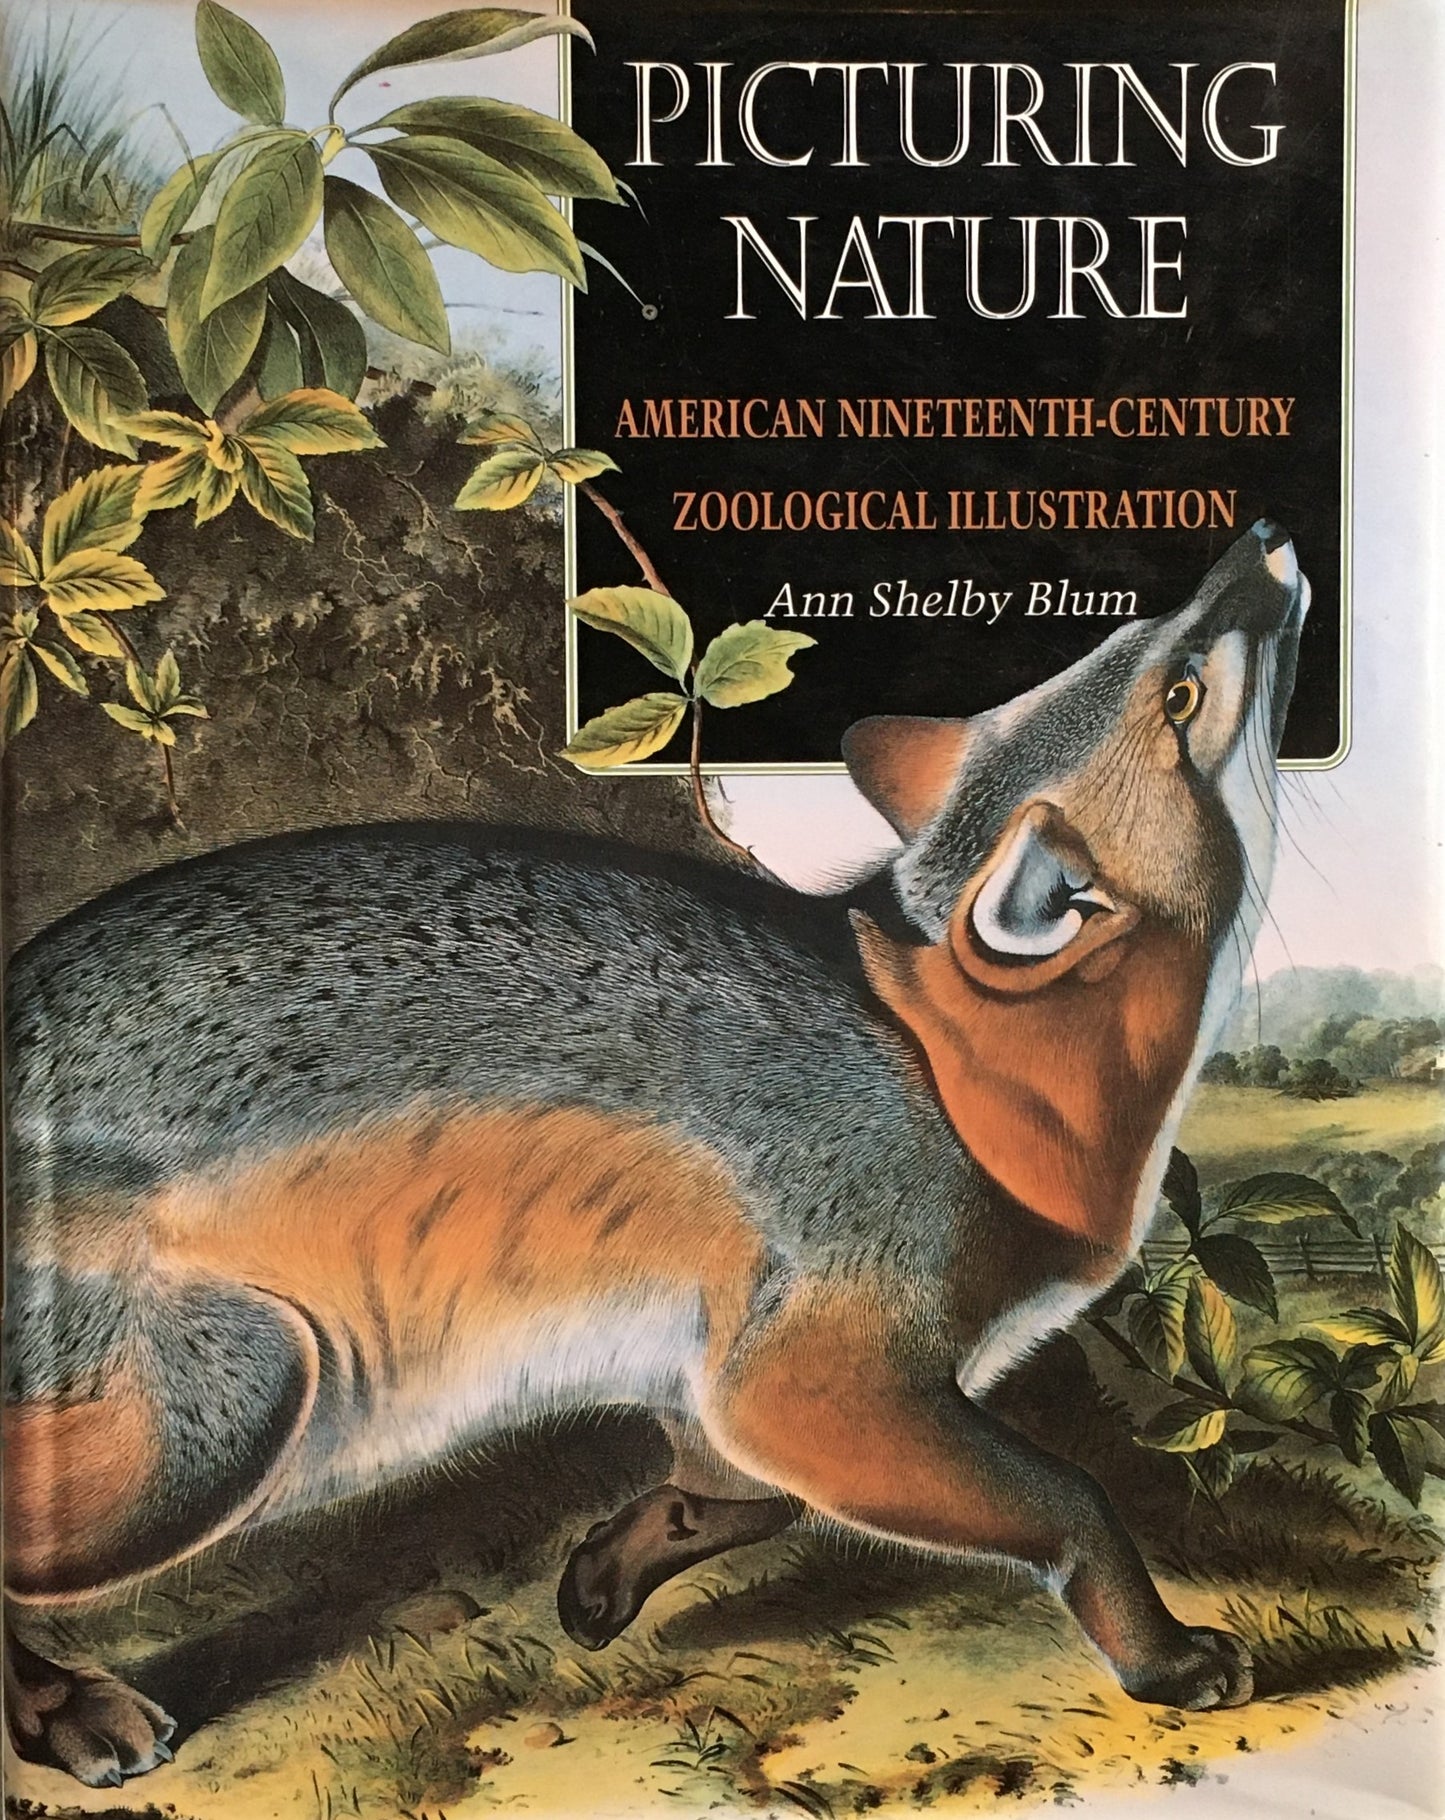 Picturing Nature　American Nineteenth-Century Zoological Illustration　Ann Shelby Blum